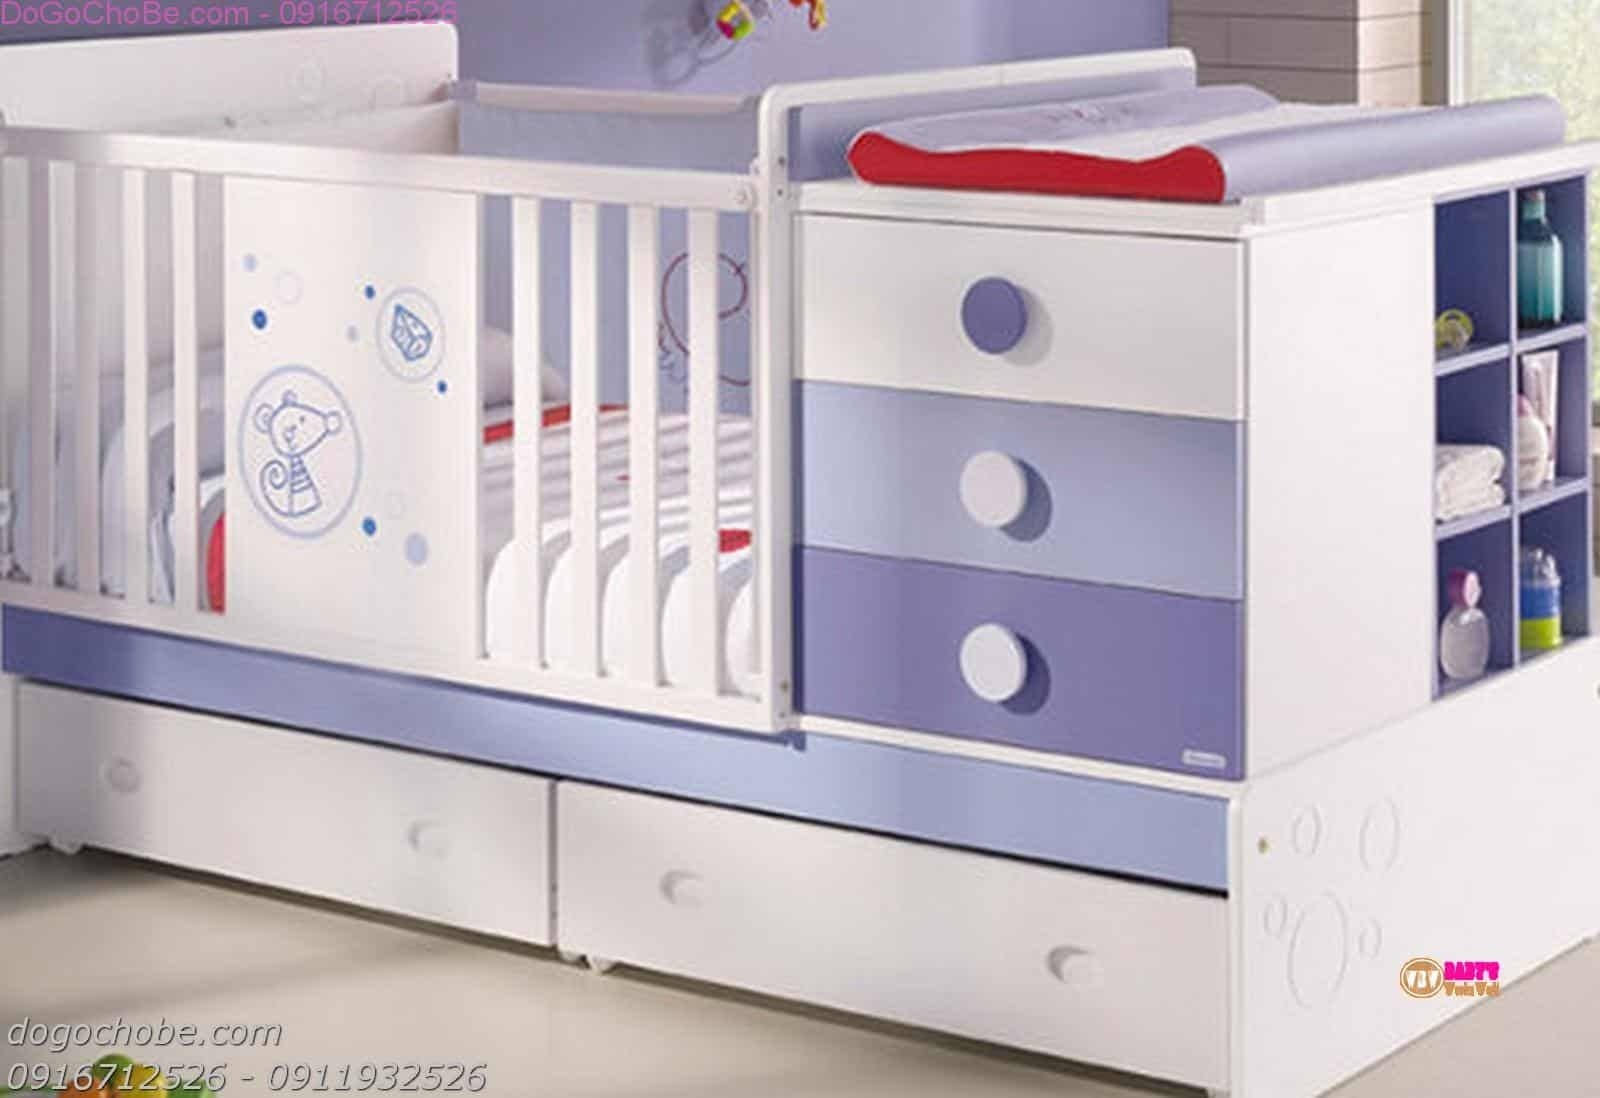 Crib With Storage Drawer - Ideas on Foter